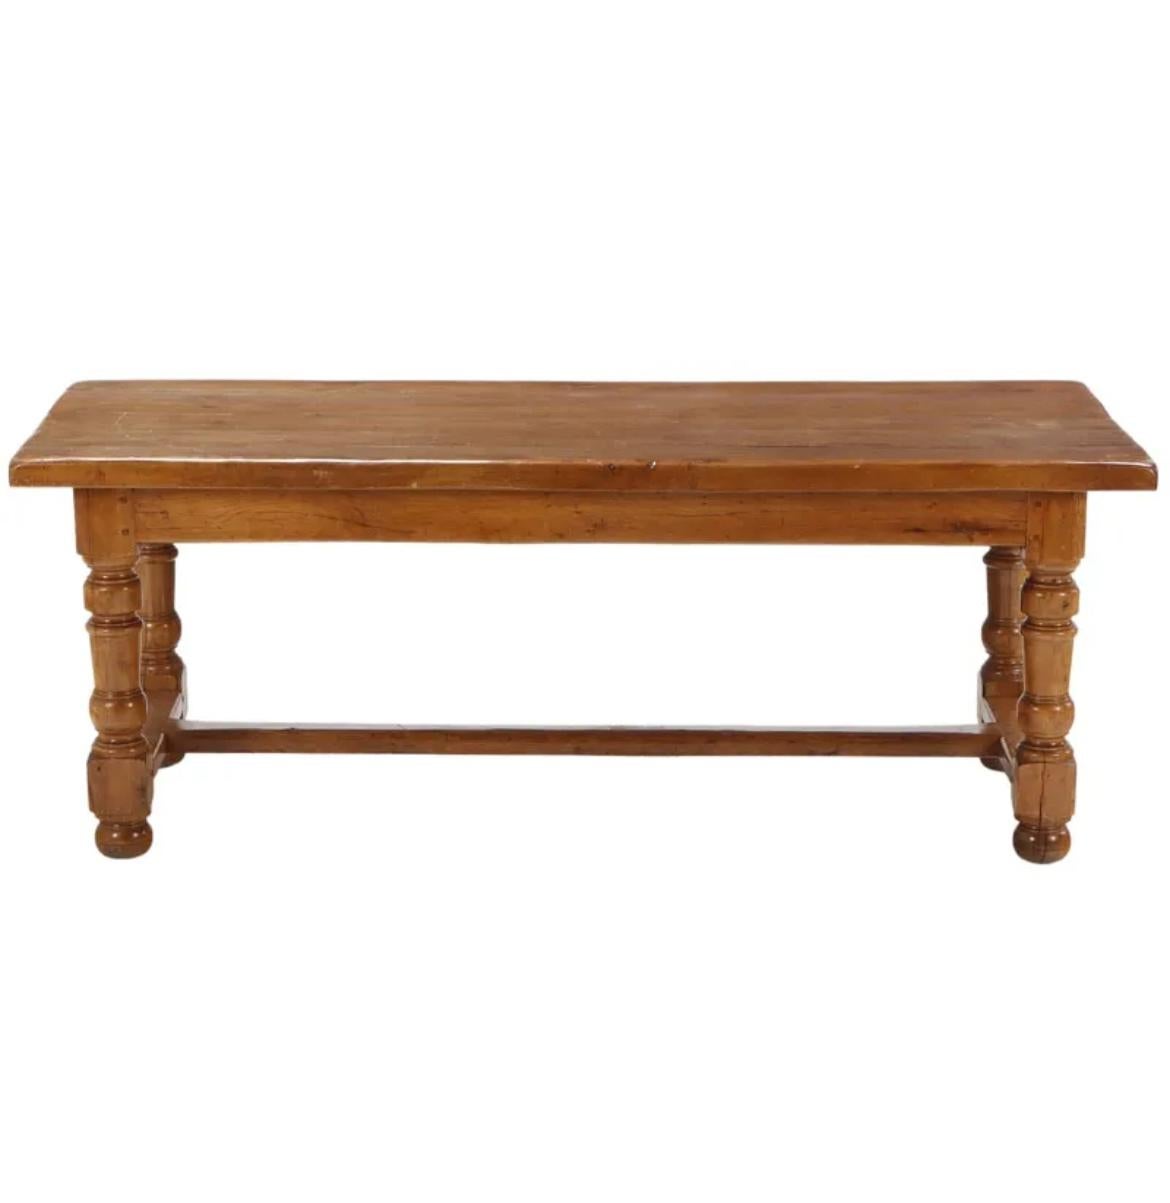 A truly fantastic late 19th century French oak table. This is one of the best examples we have ever found in the farmhouse style. Just an overwhelming amount of character. Can be used as a dining table or desk. 